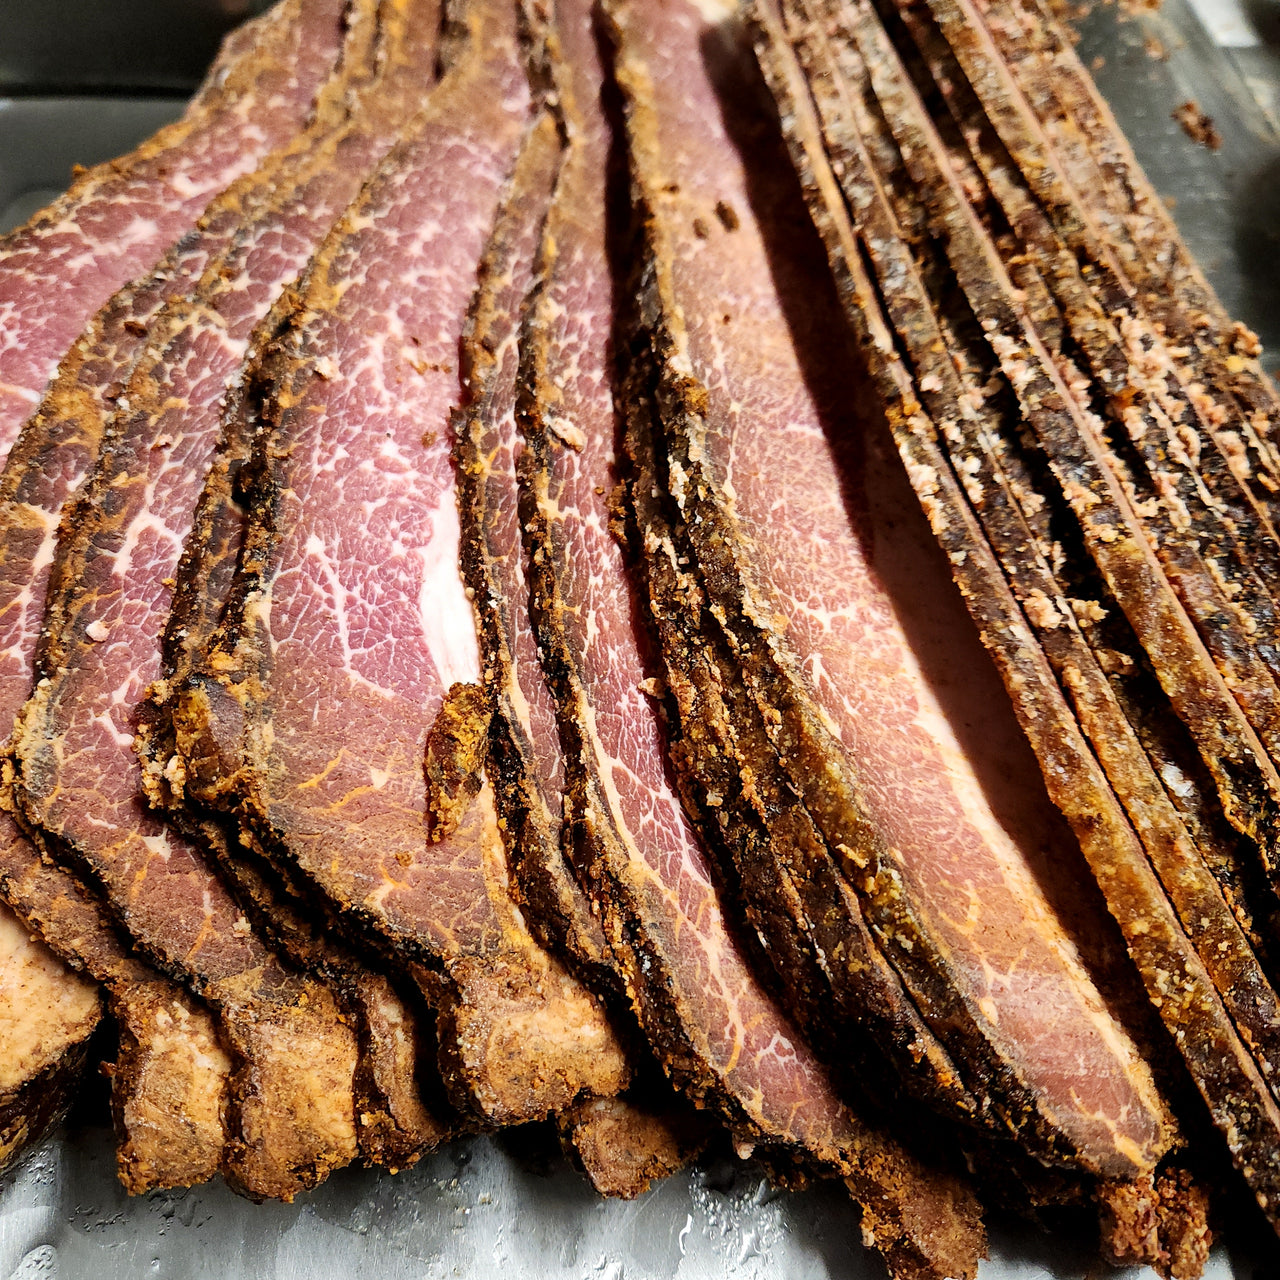 Wagyu Beef Pastrami Uncured, Med Thick Sliced, 2-3 slices /Approx 75- 1 lb Pkg /NOT Aged